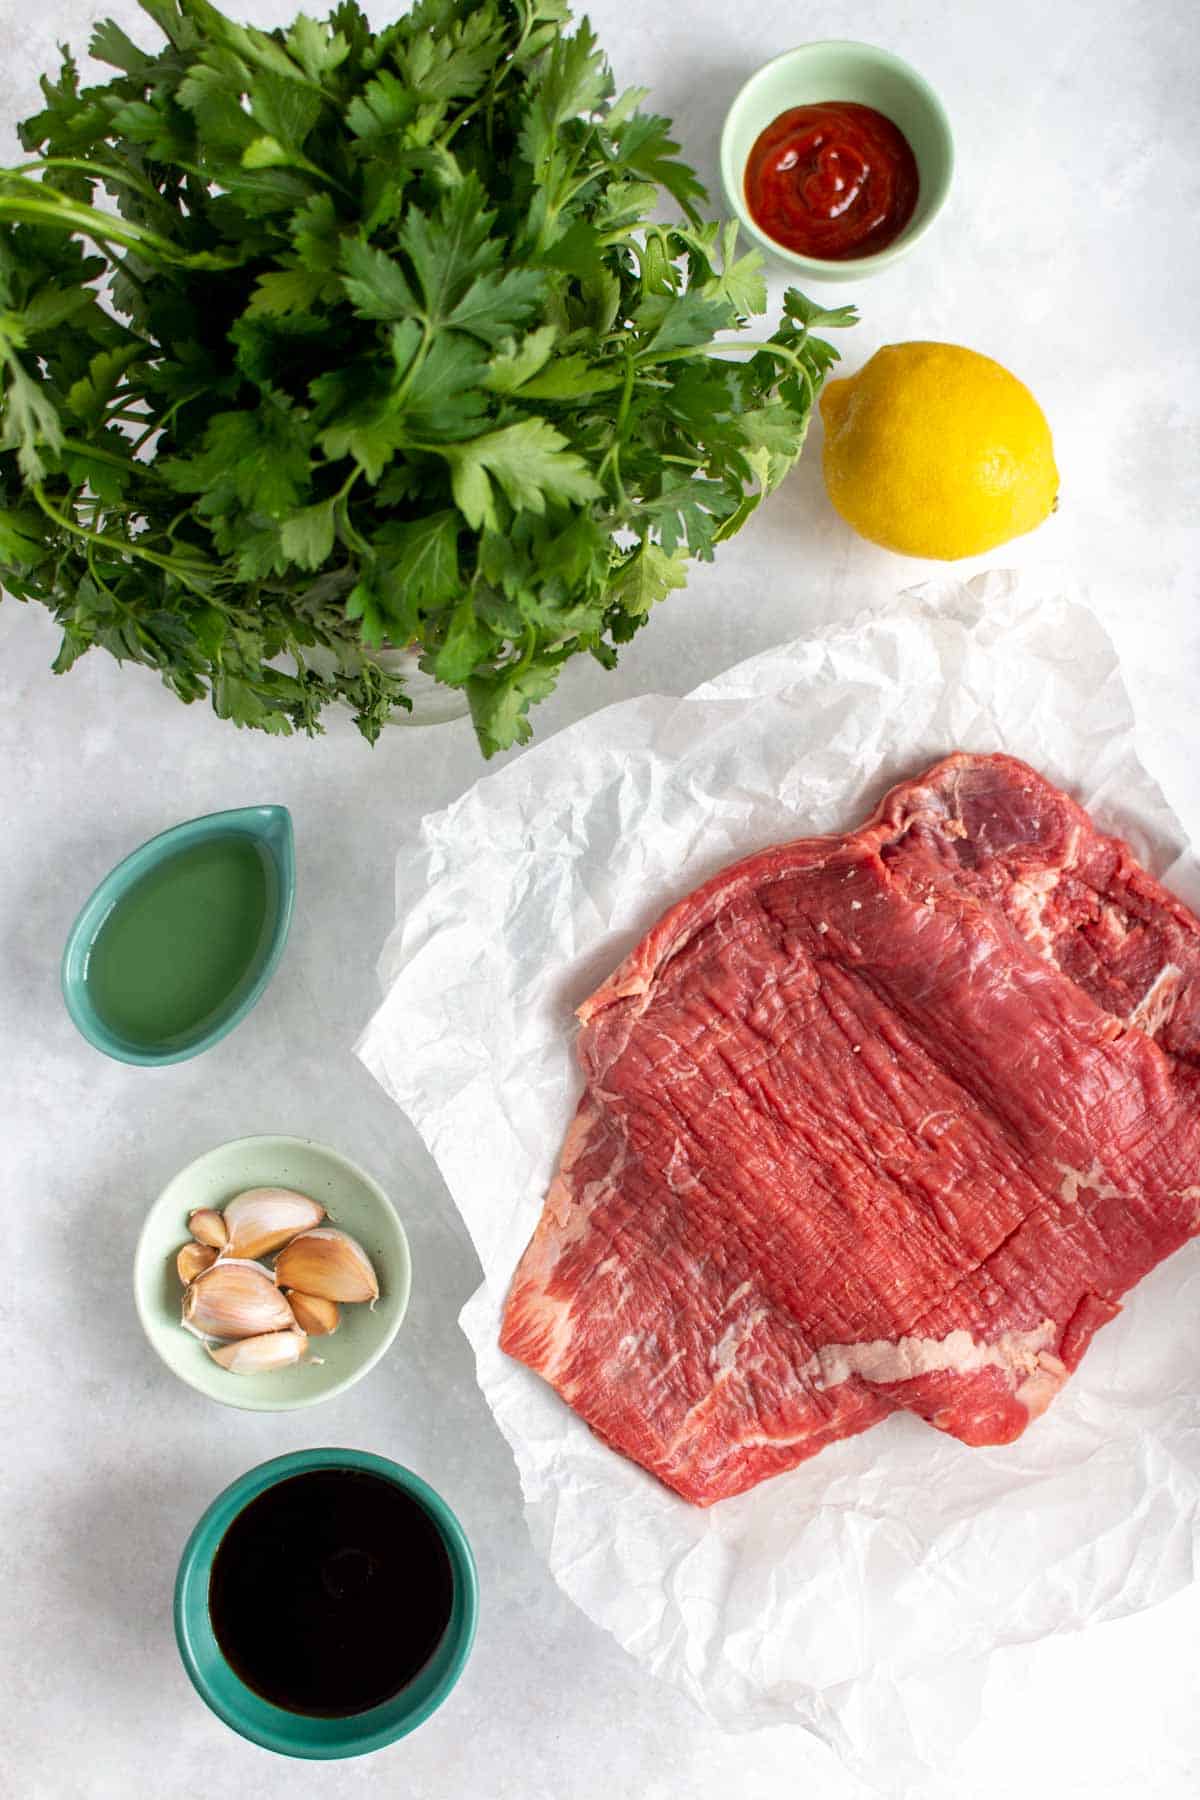 Ingredients of what you'd need to marinate a flank steak.